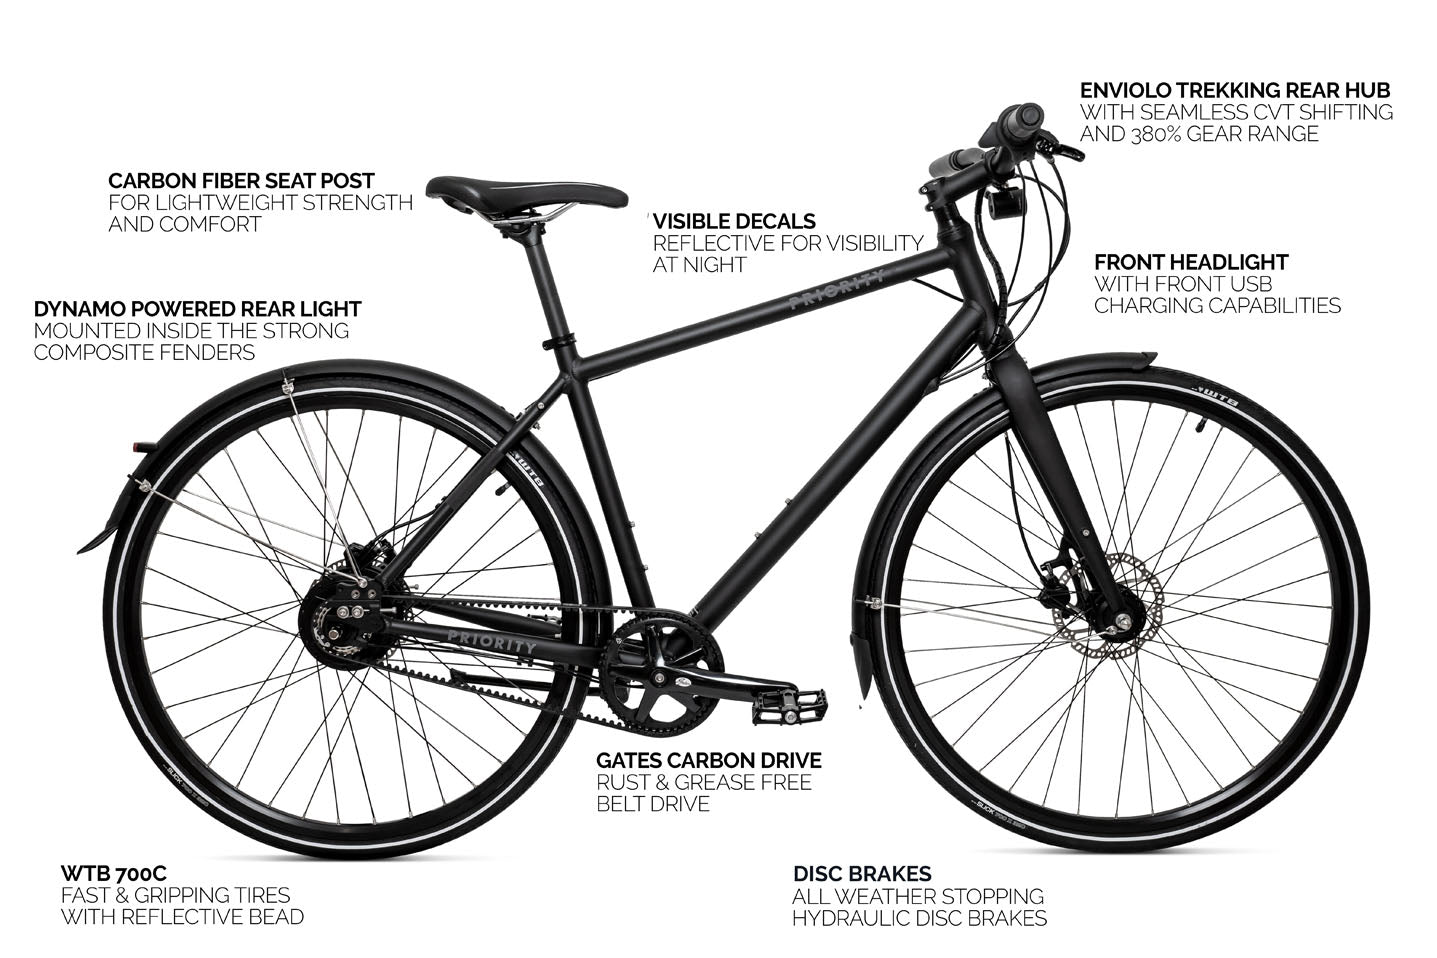 The Continuum Onyx by Priority Bicycles